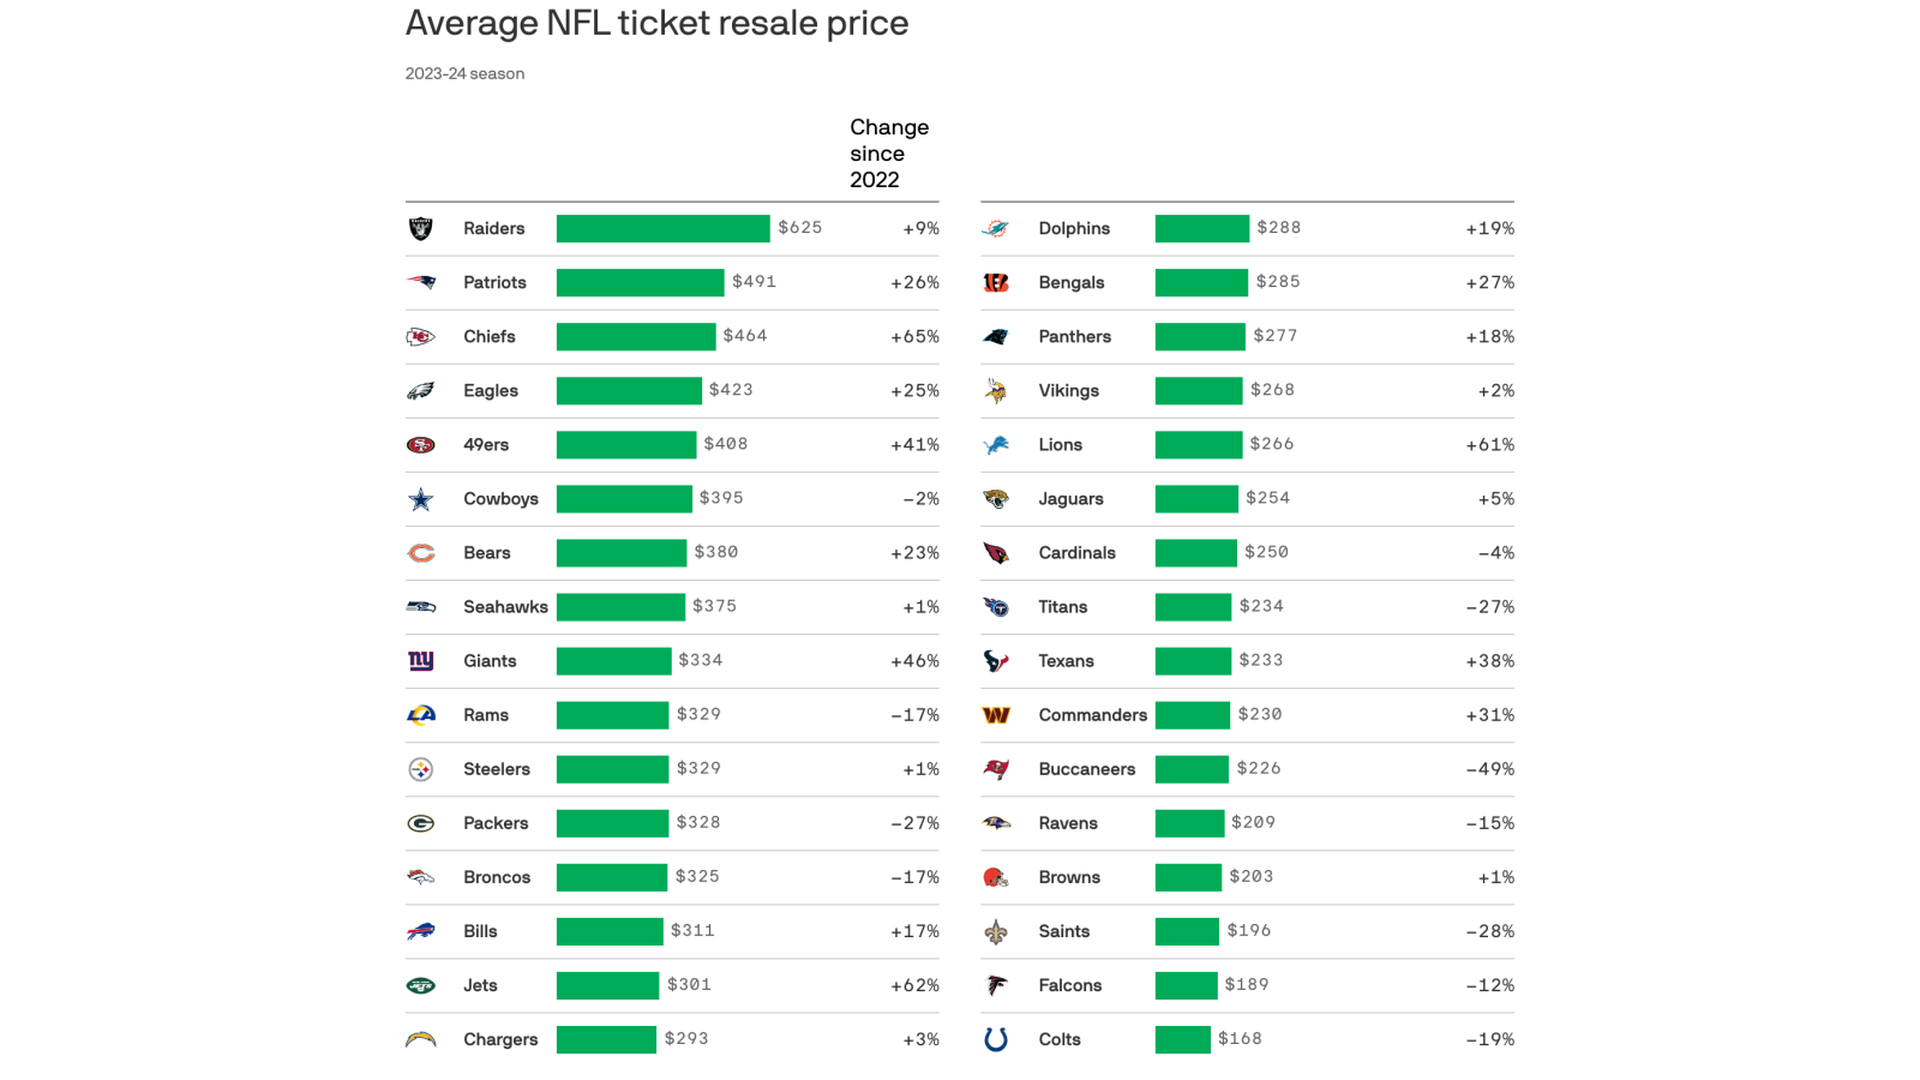 A table showing the average ticket resale prices of NFL teams for the 2023-24 season. The Raiders top the list at $625 while the Colts are the cheapest at $168.